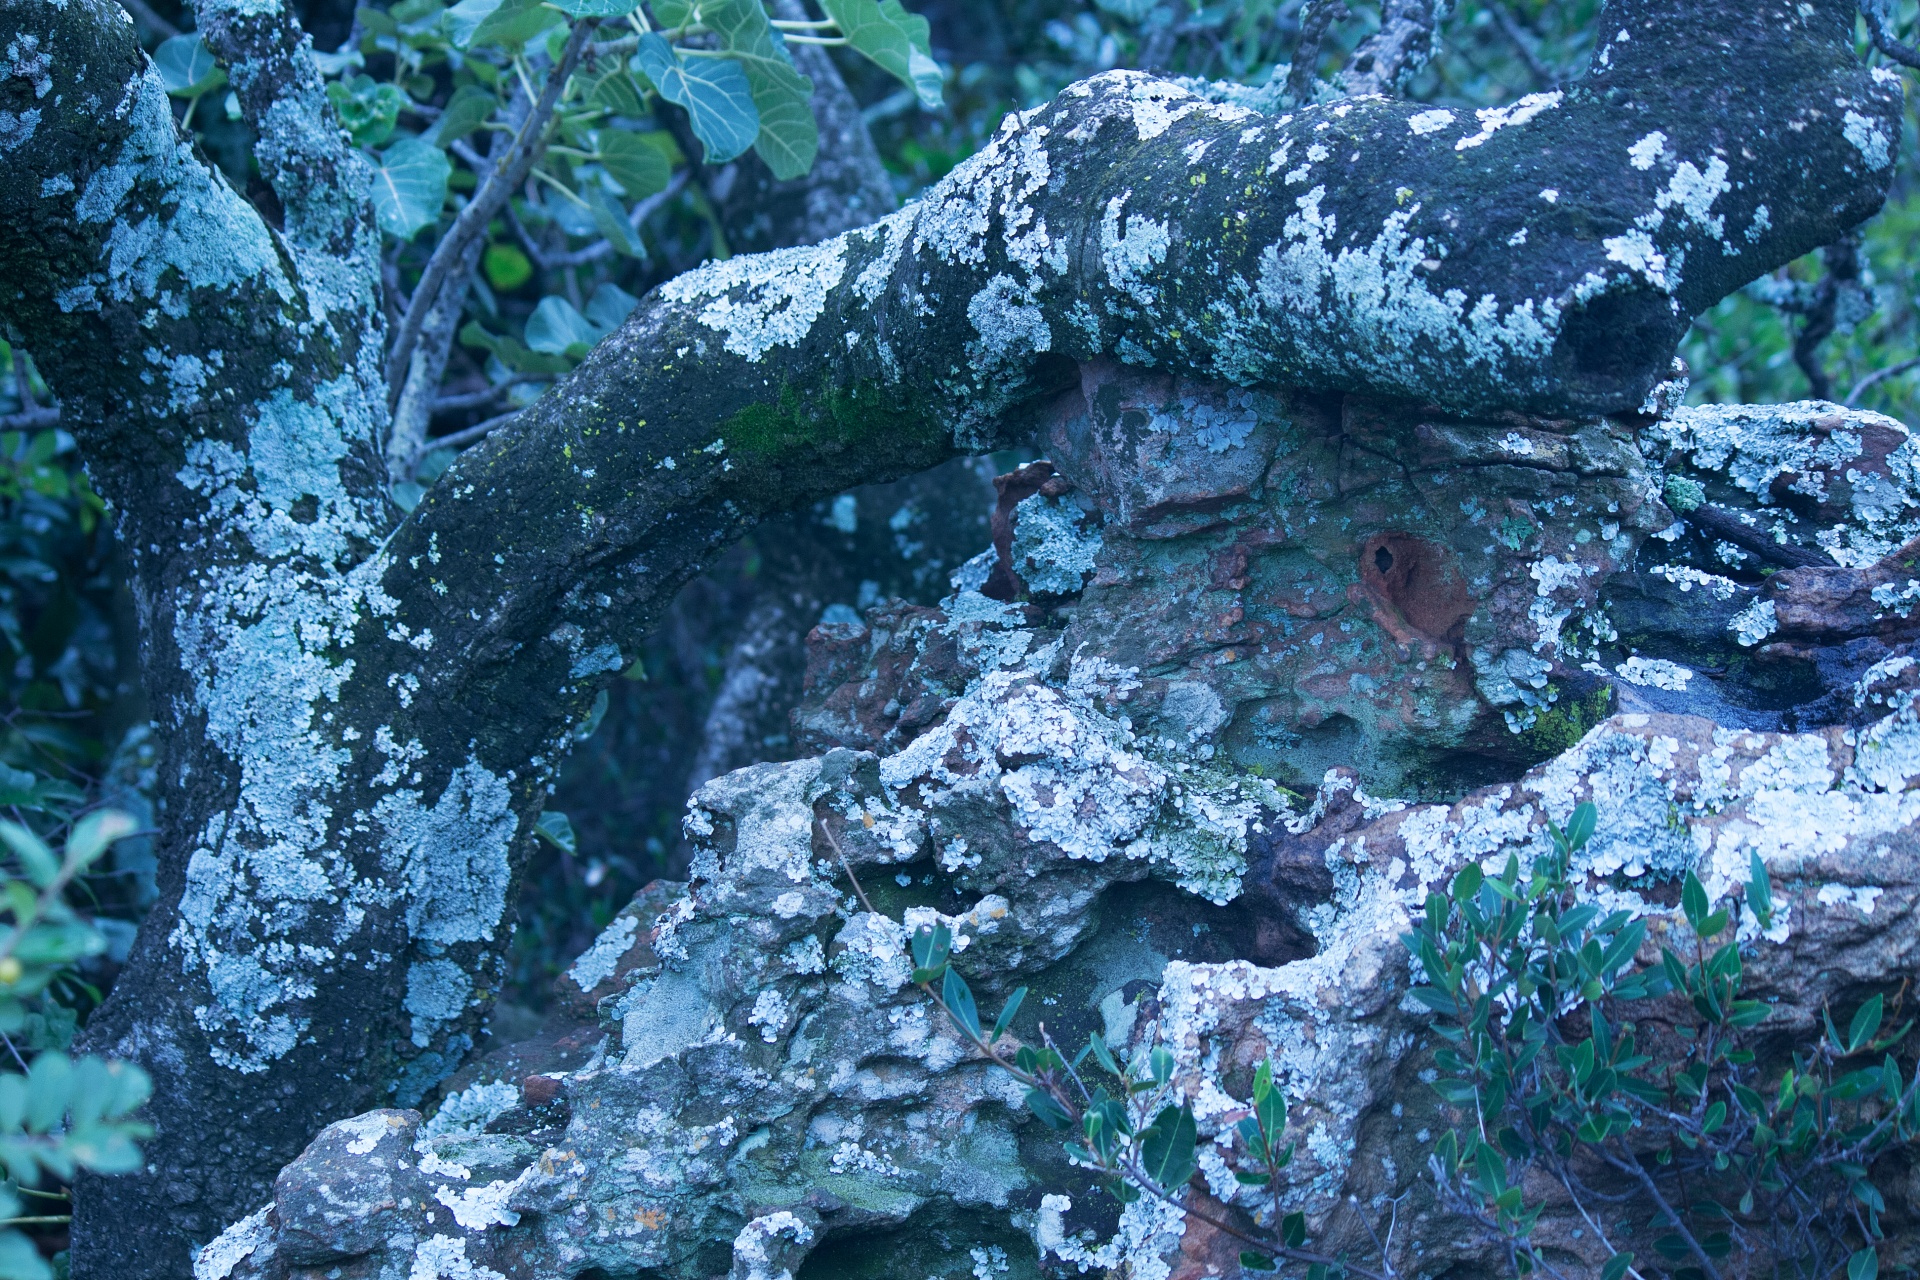 Lichen Growing On Branches & Rocks